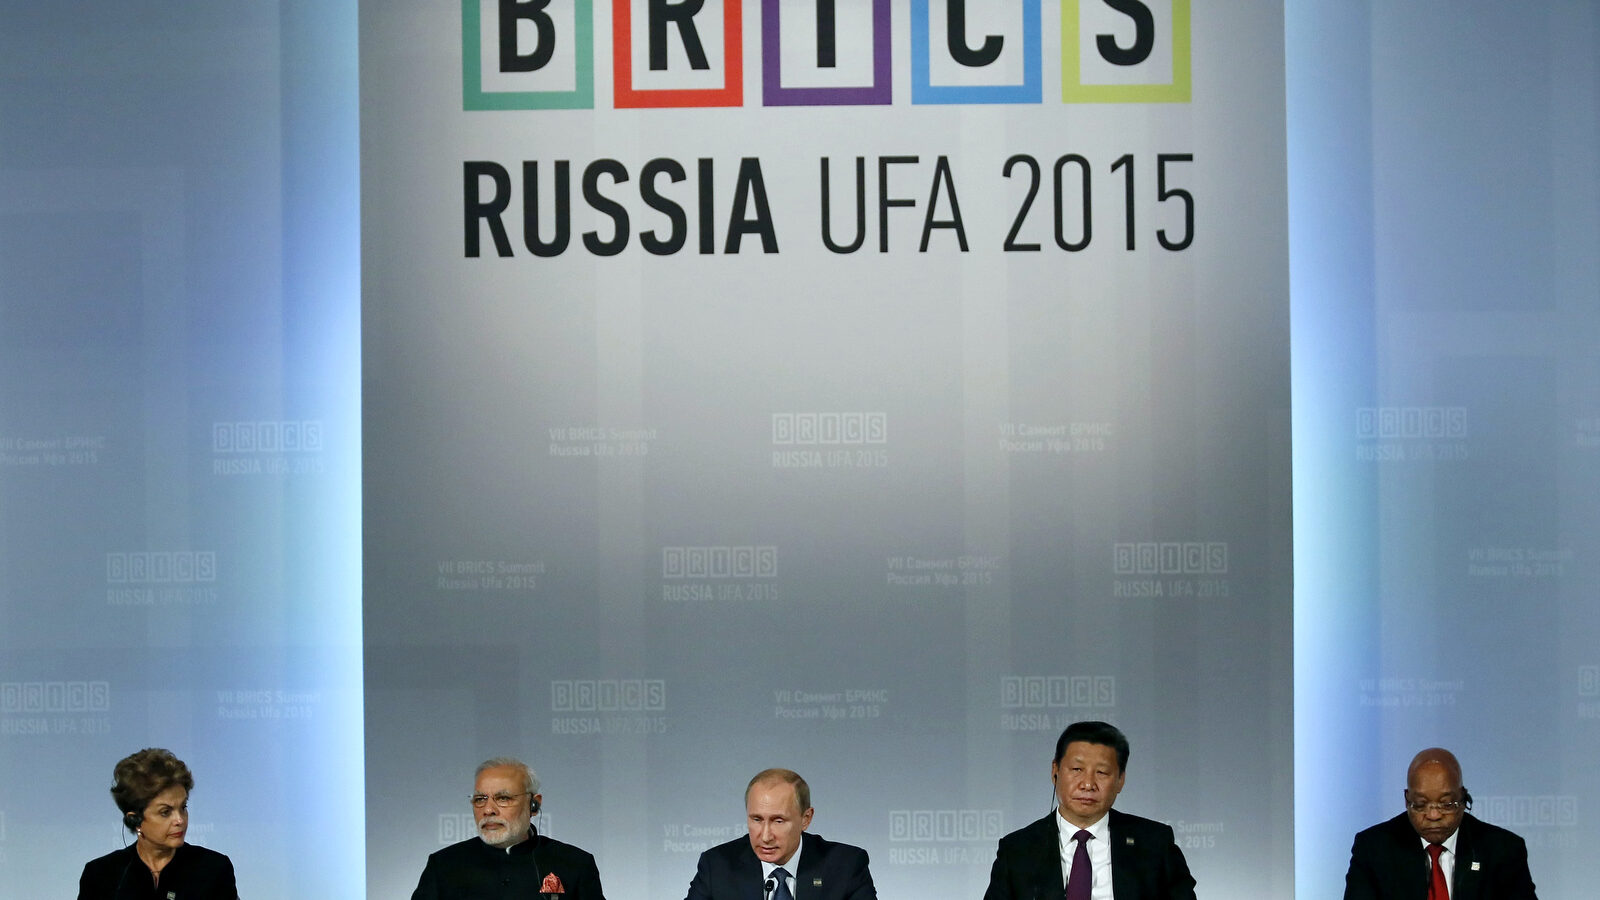 From left: Brazil's President Dilma Rousseff , Indian Prime Minister Narendra Modi, President of Russia Vladimir Putin, President of China Xi Jinping and South African President Jacob Zuma sit during a signing ceremony at the BRICS Summit in Ufa, Russia, Thursday, July 9, 2015. Ufa is hosting BRICS (Brazil, Russia, India, China and South Africa) and SCO (Shanghai Cooperation Organisation) summits. (Sergei Ilnitsky/Pool photo via AP)